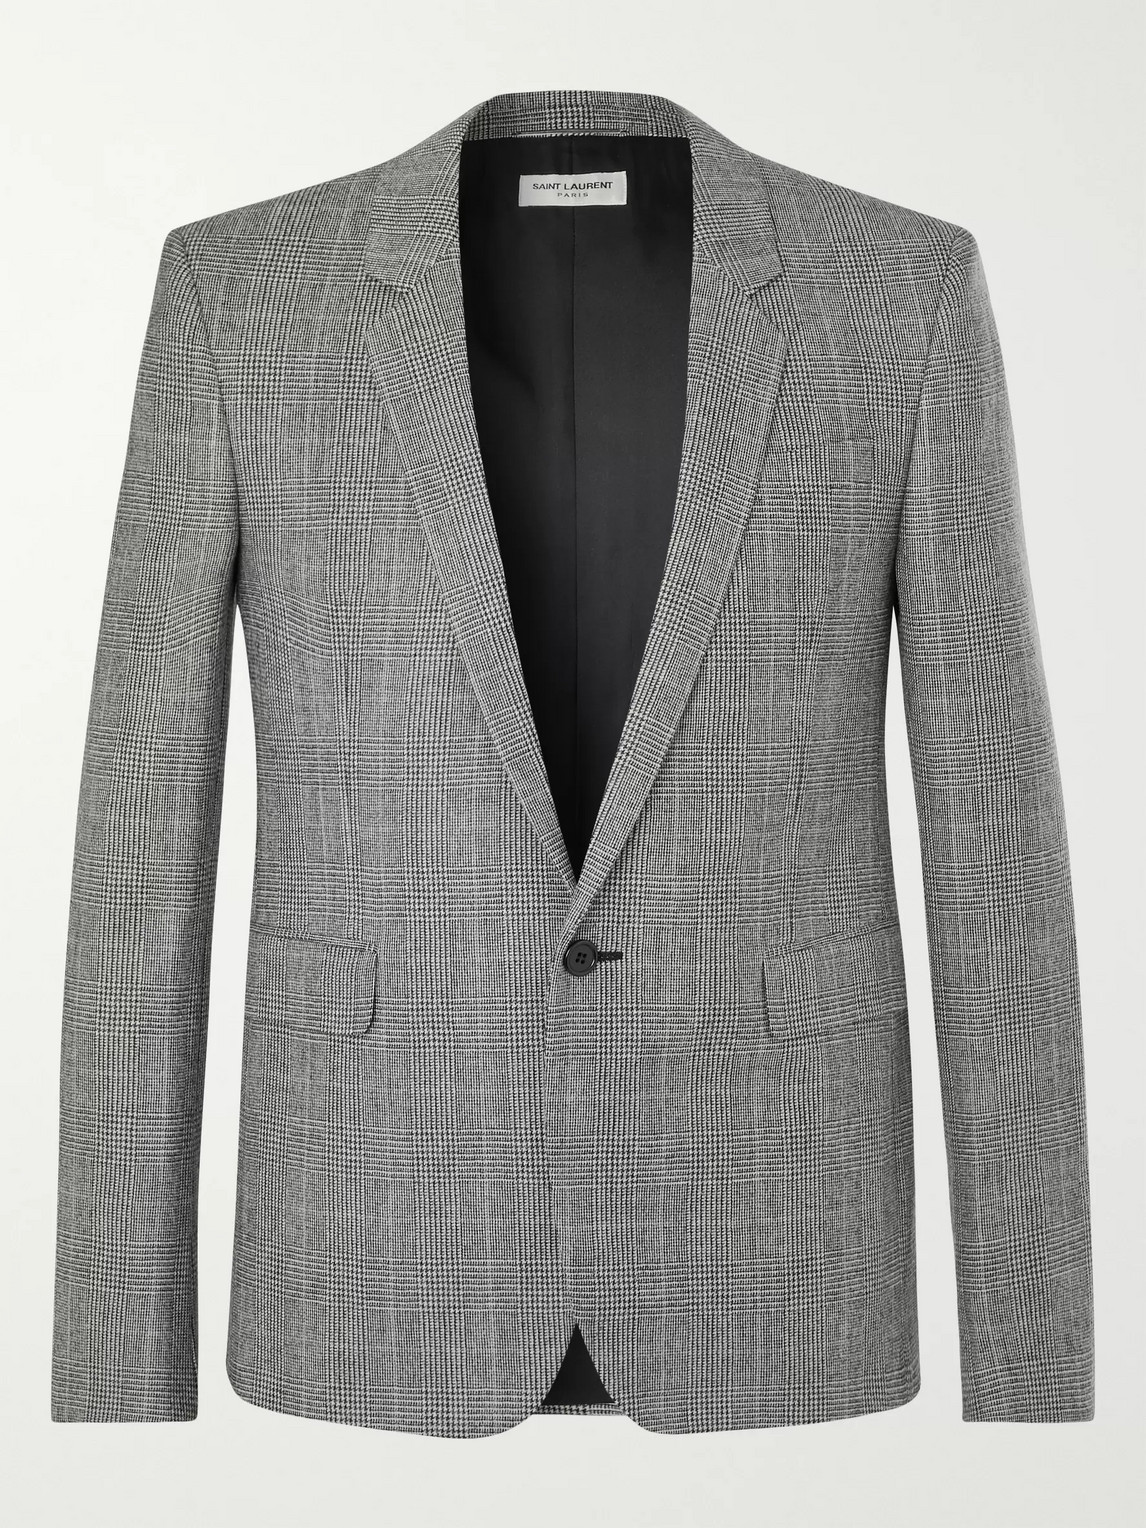 SAINT LAURENT PRINCE OF WALES CHECKED WOOL BLAZER